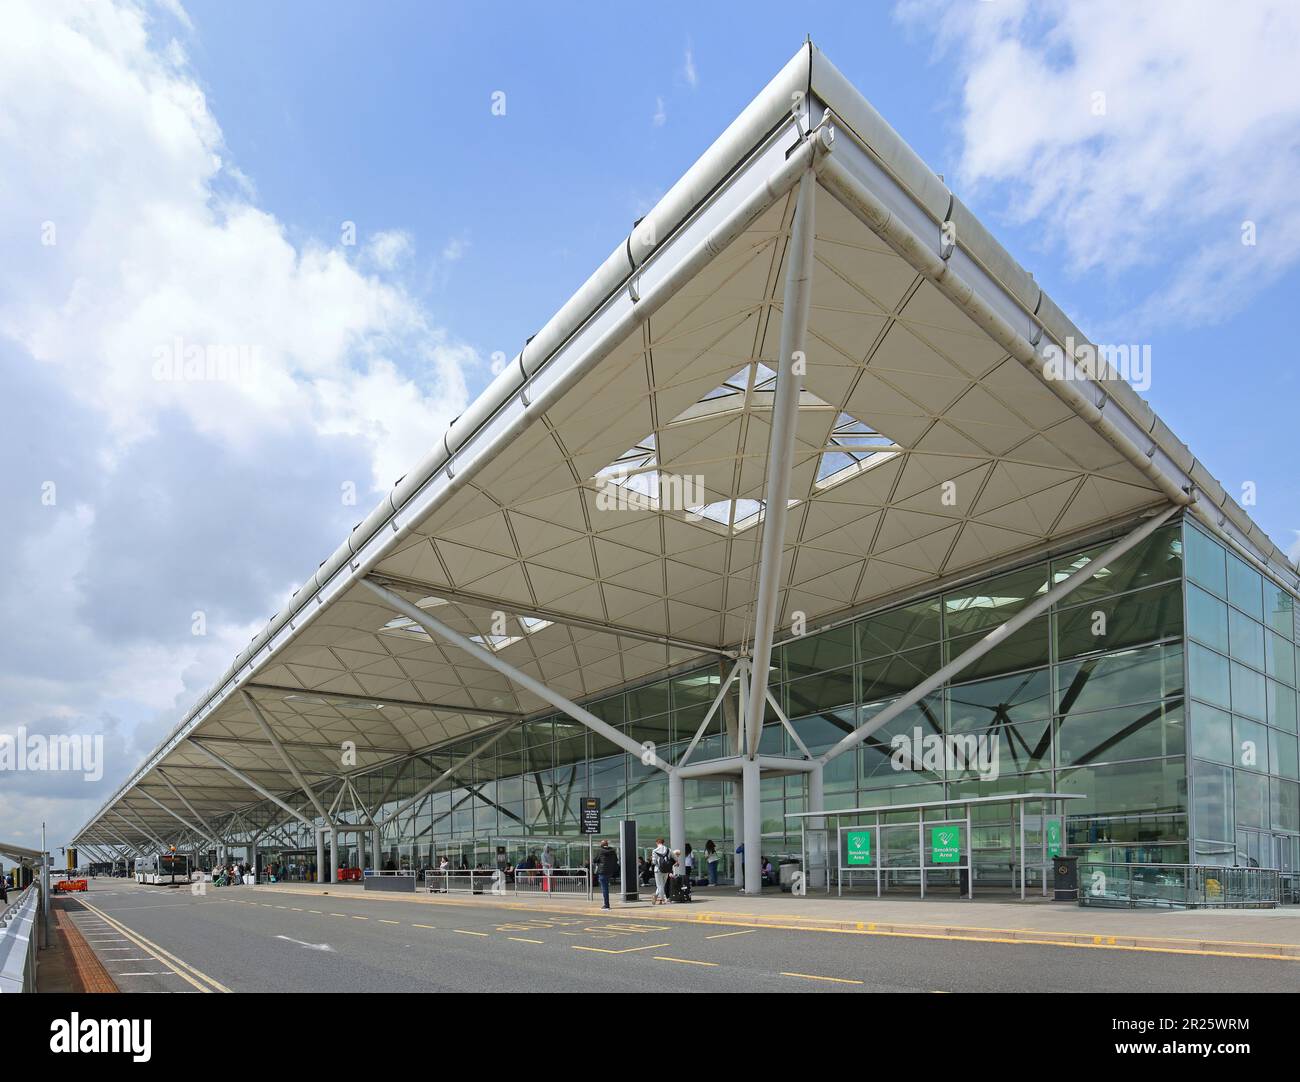 Stansted Airport, UK. Main approach road and entrance to the terminal building designed by Norman Foster. Stock Photo